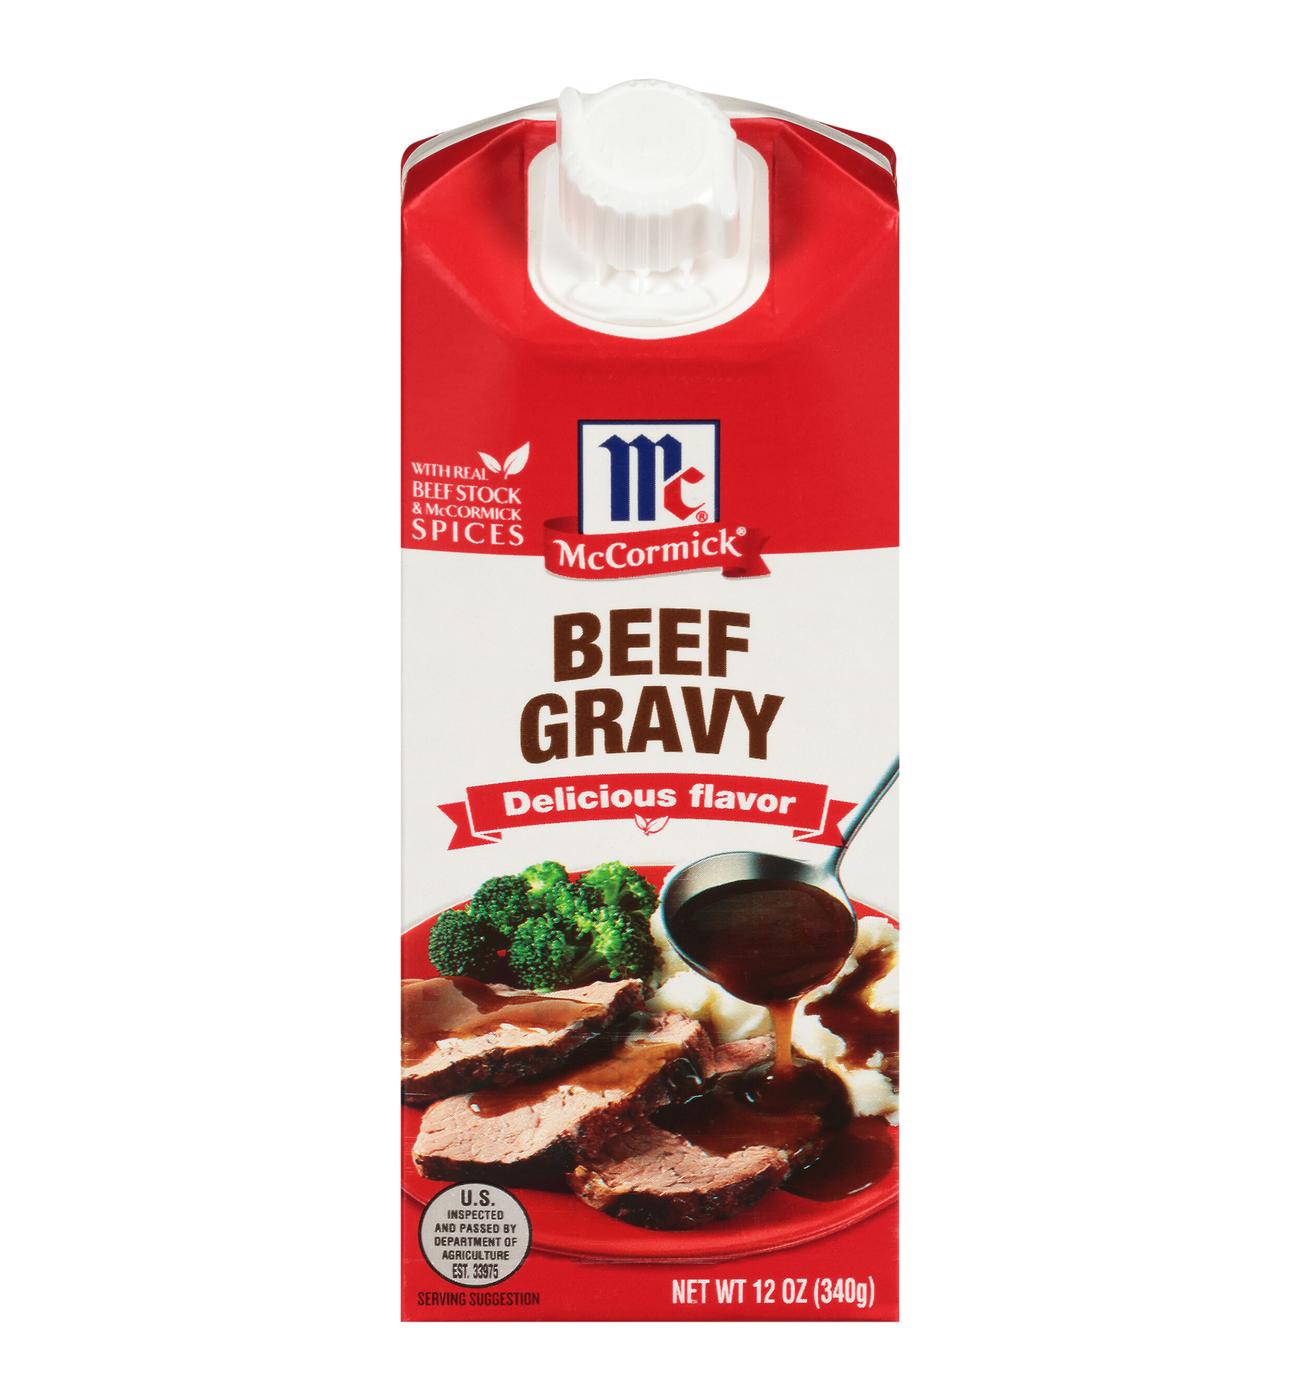 McCormick Simply Better Beef Gravy; image 1 of 5